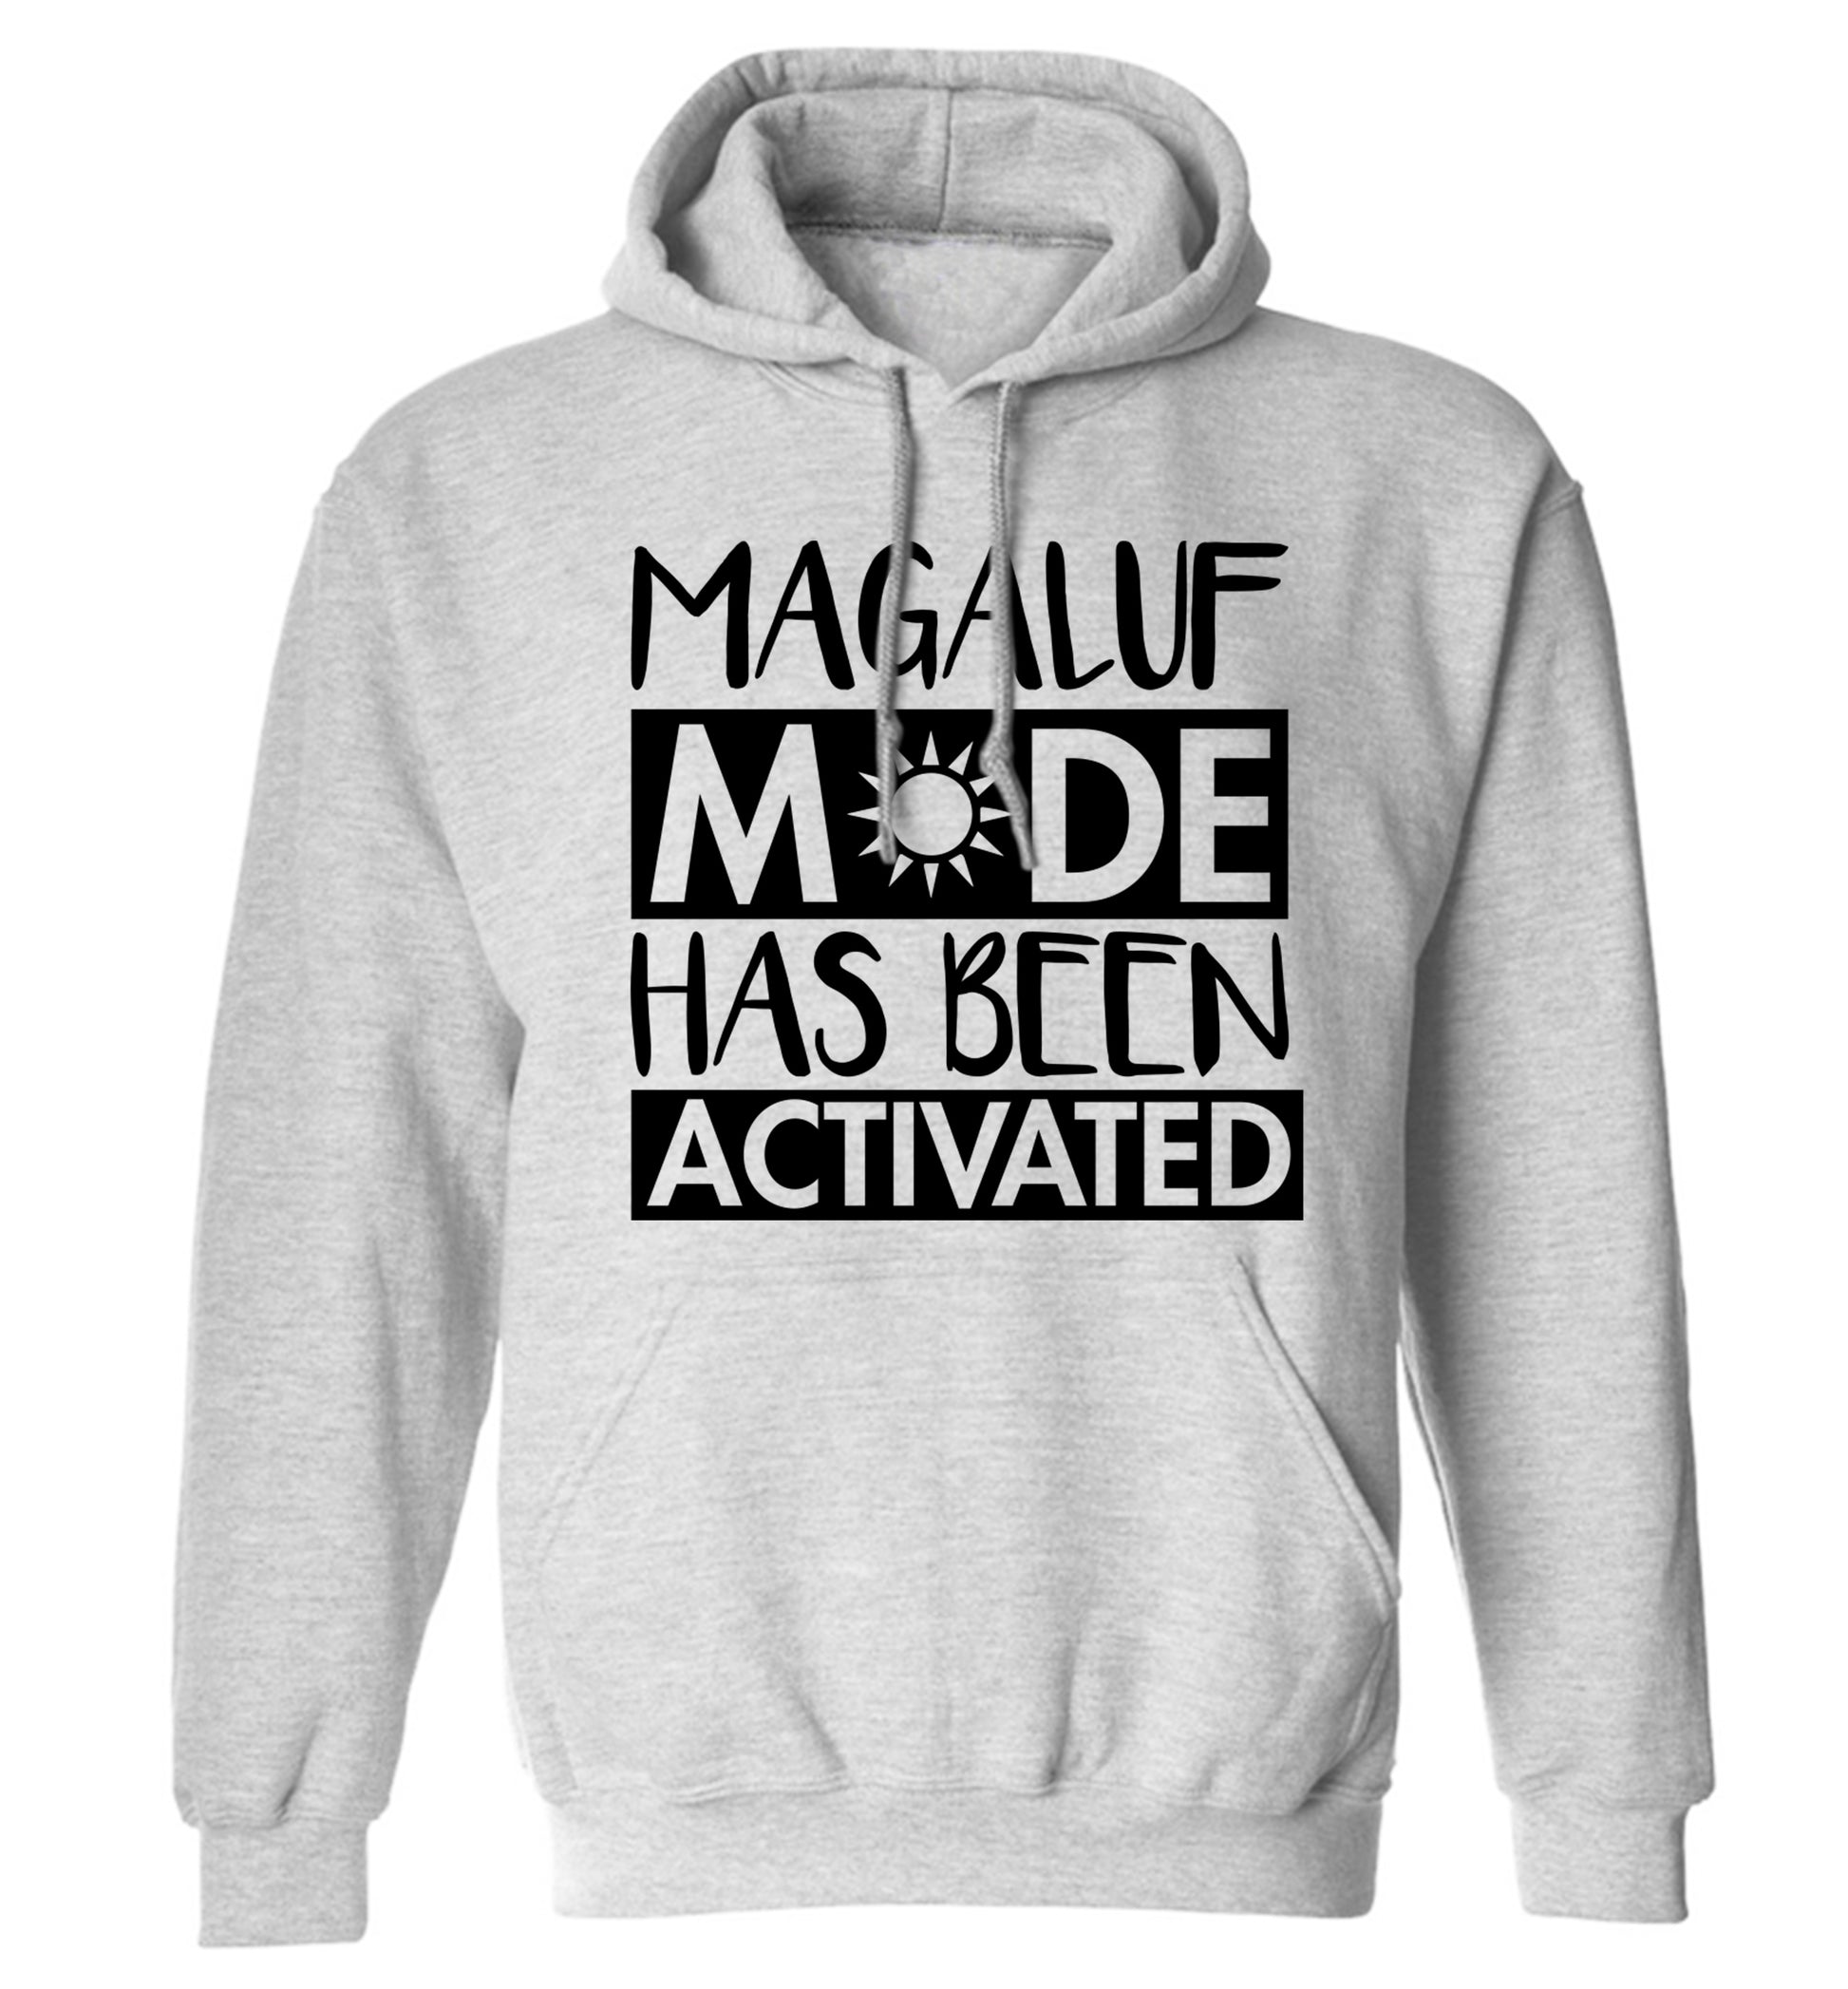 Magaluf mode has been activated adults unisex grey hoodie 2XL